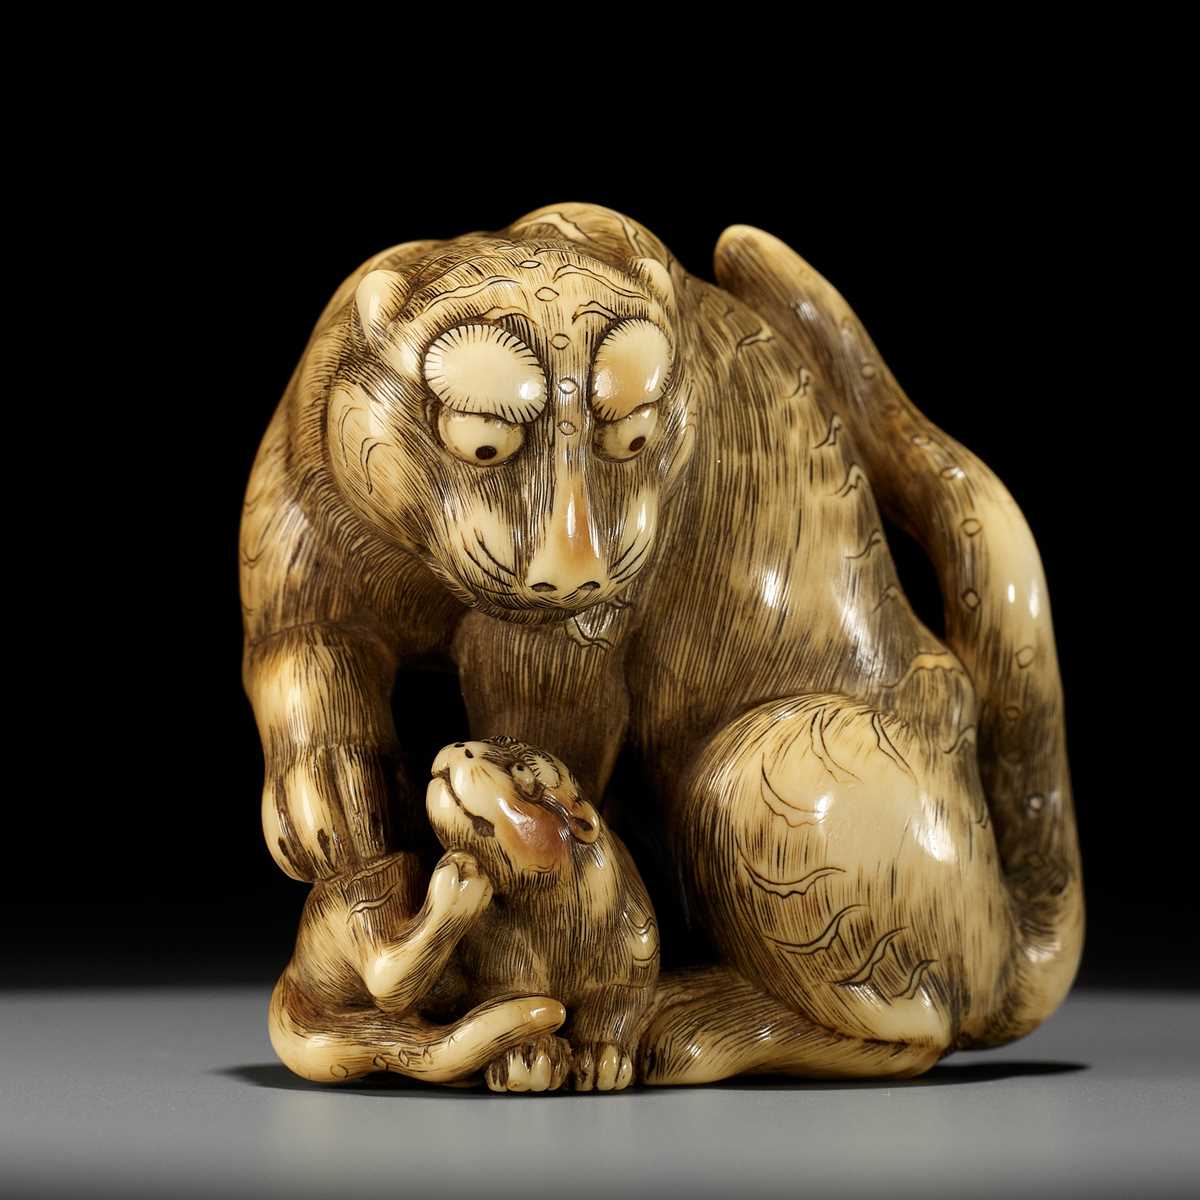 Lot 139 - A SUPERB IVORY NETSUKE OF A TIGER WITH CUB, ATTRIBUTED TO TOMOTADA